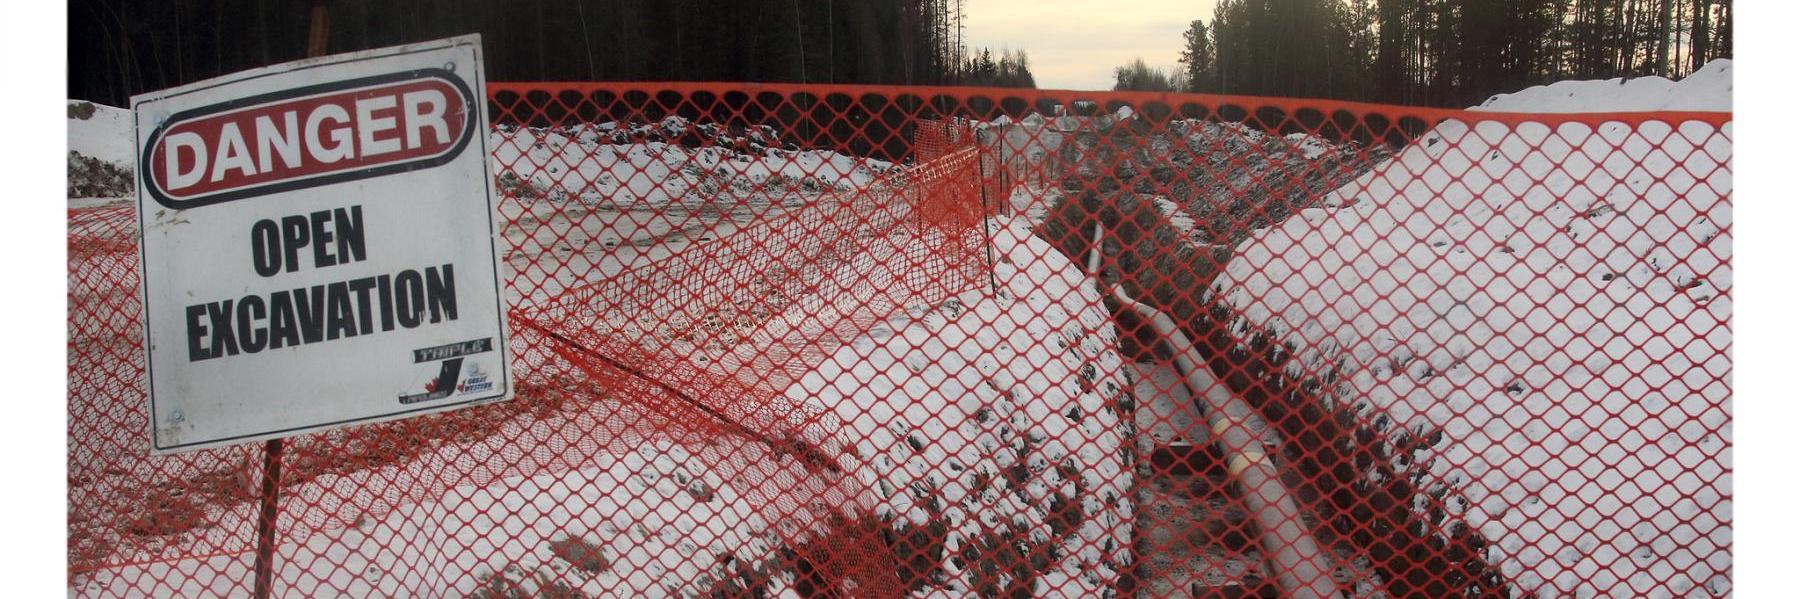 orange construction fence with Open Excavation Sign -- snowy forest setting